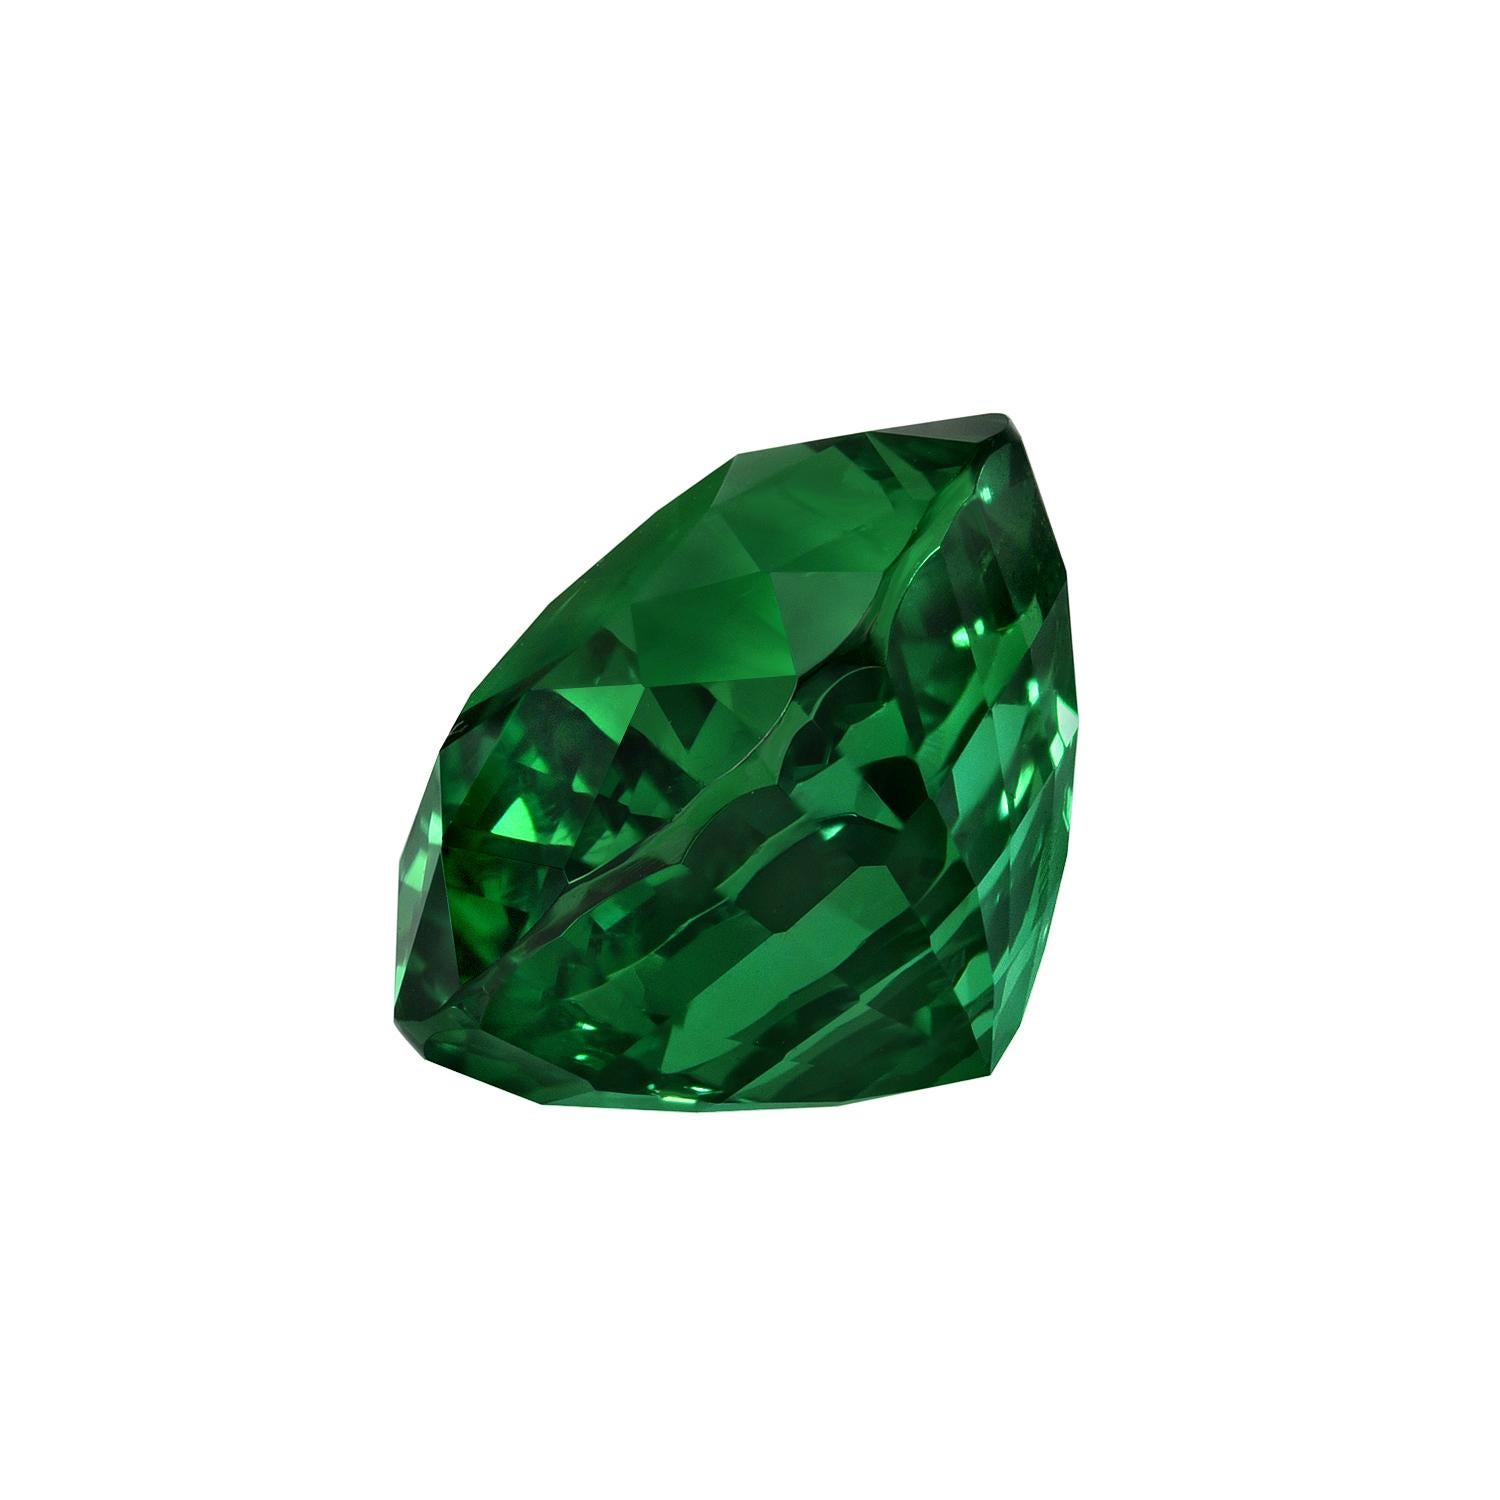 Exceptional 5.87 carat Tsavorite Garnet cushion gem, offered loose to a world-class gemstone connoisseur.
Gem Measurements: 10.77mm x 8.85mm x 7.31mm
The GIA certificate is attached to the image selection for your reference.
Returns are accepted and